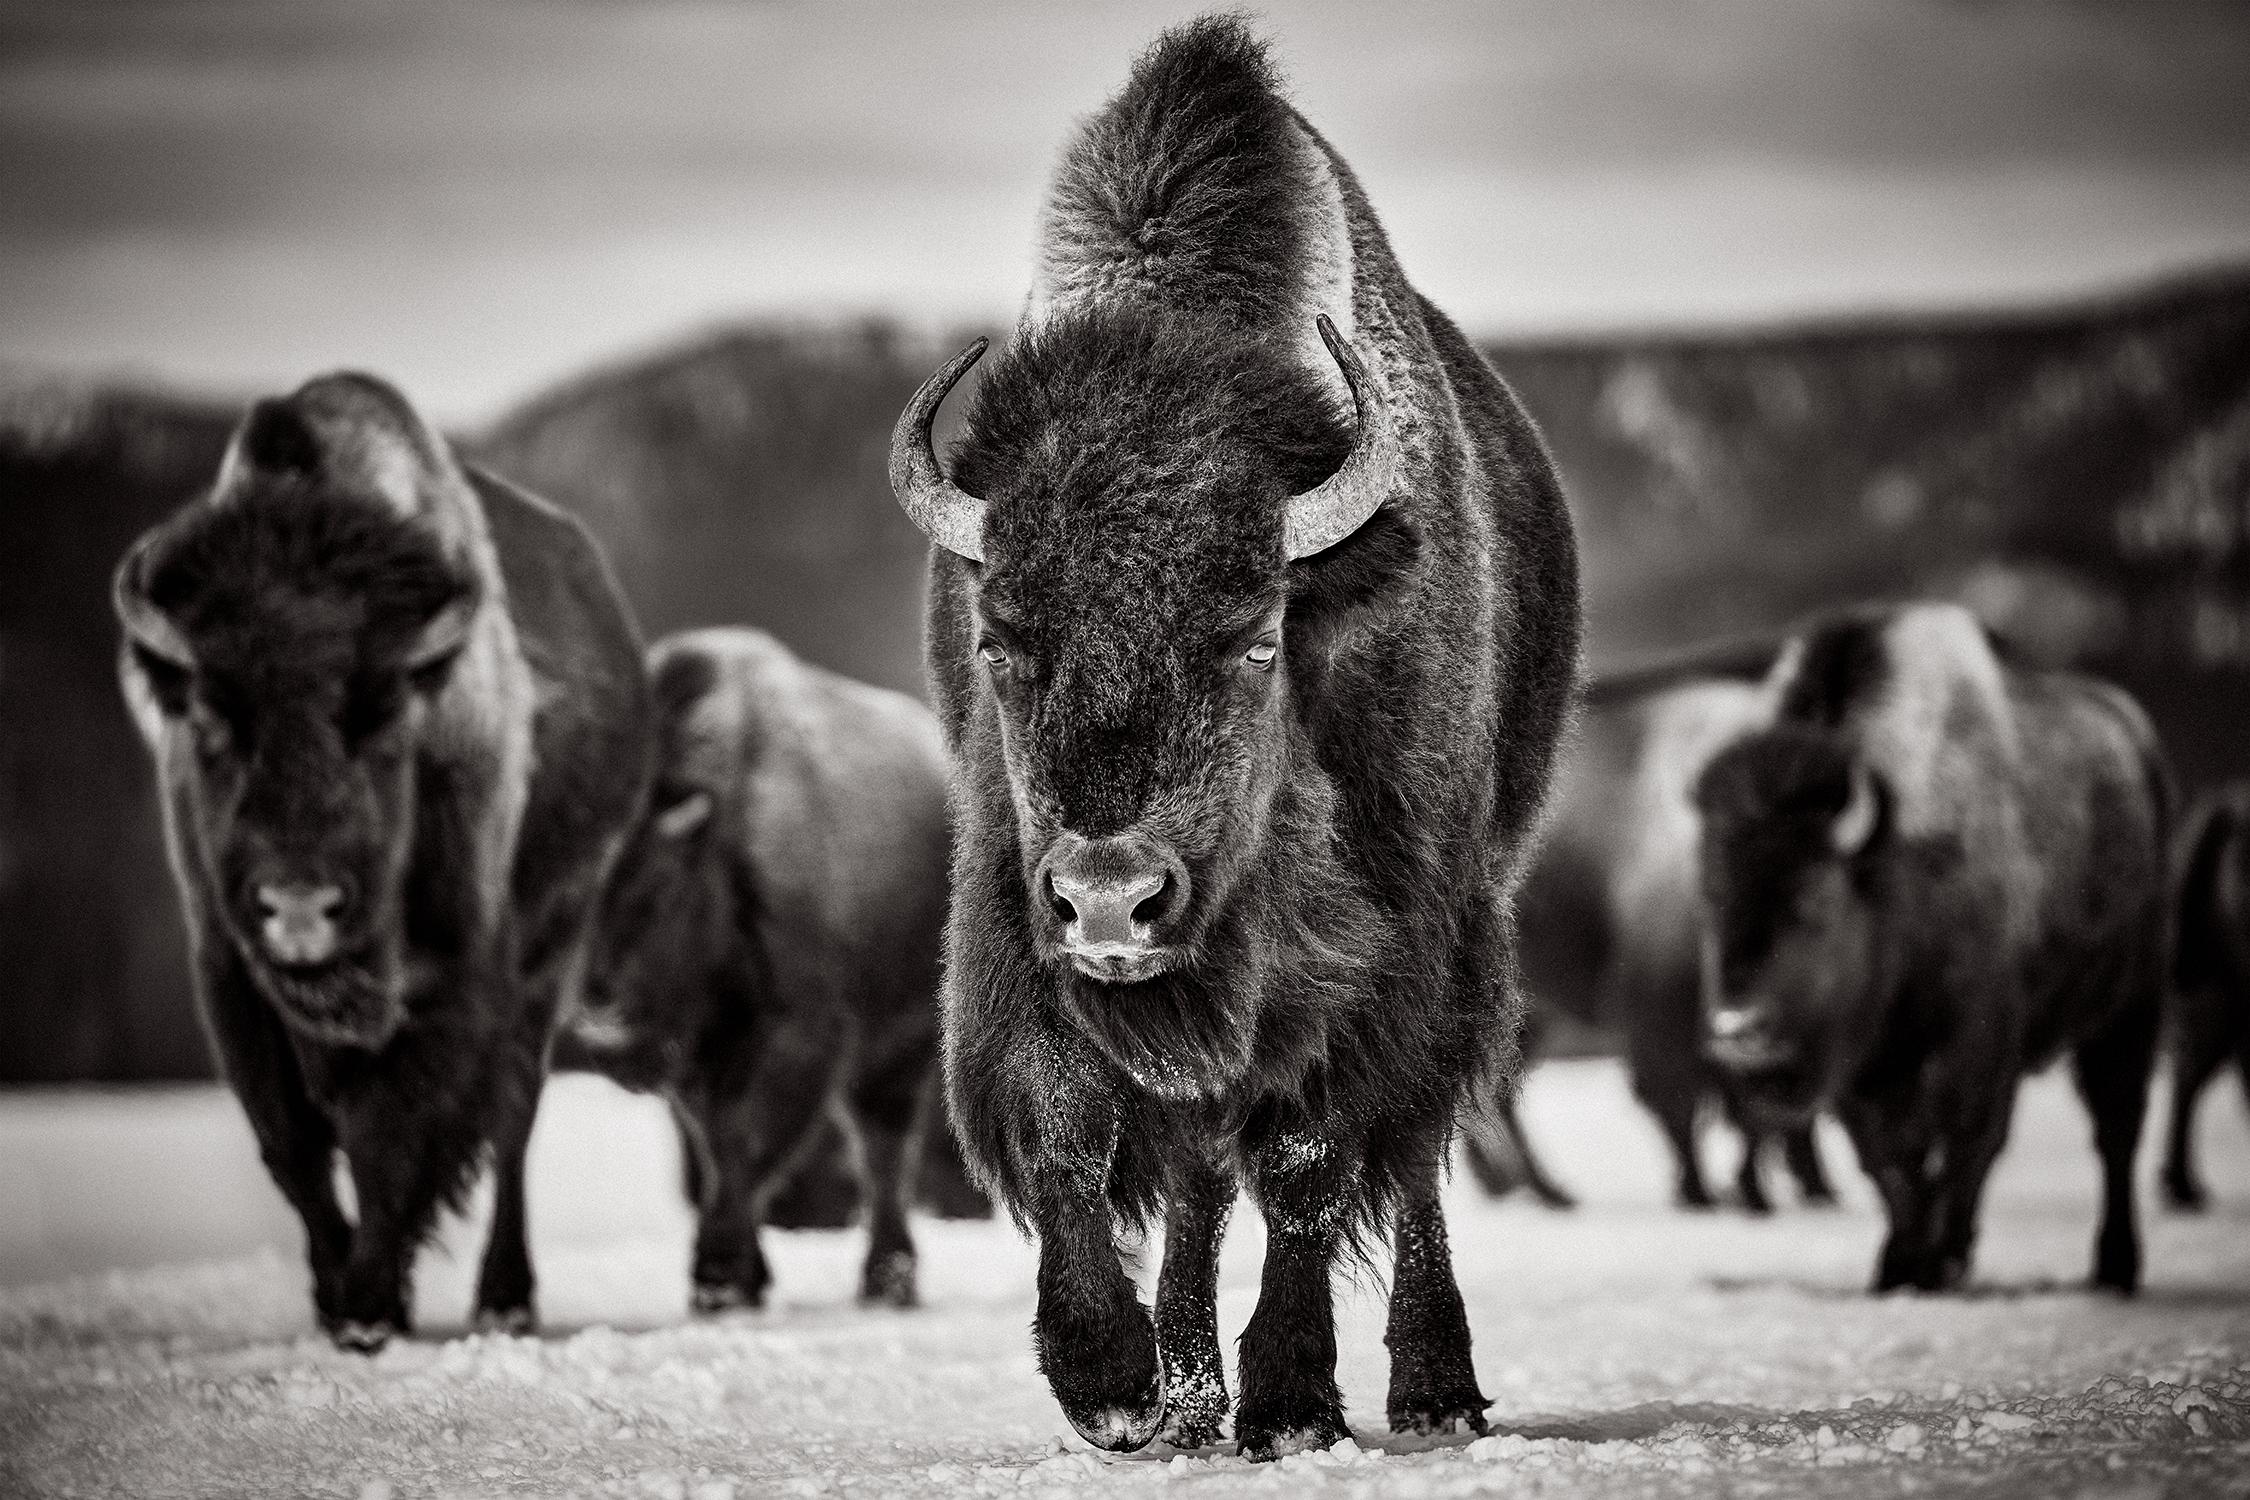 Drew Doggett Black and White Photograph - Herd of American Bison Walking Across the Plains of Yellowstone National Park